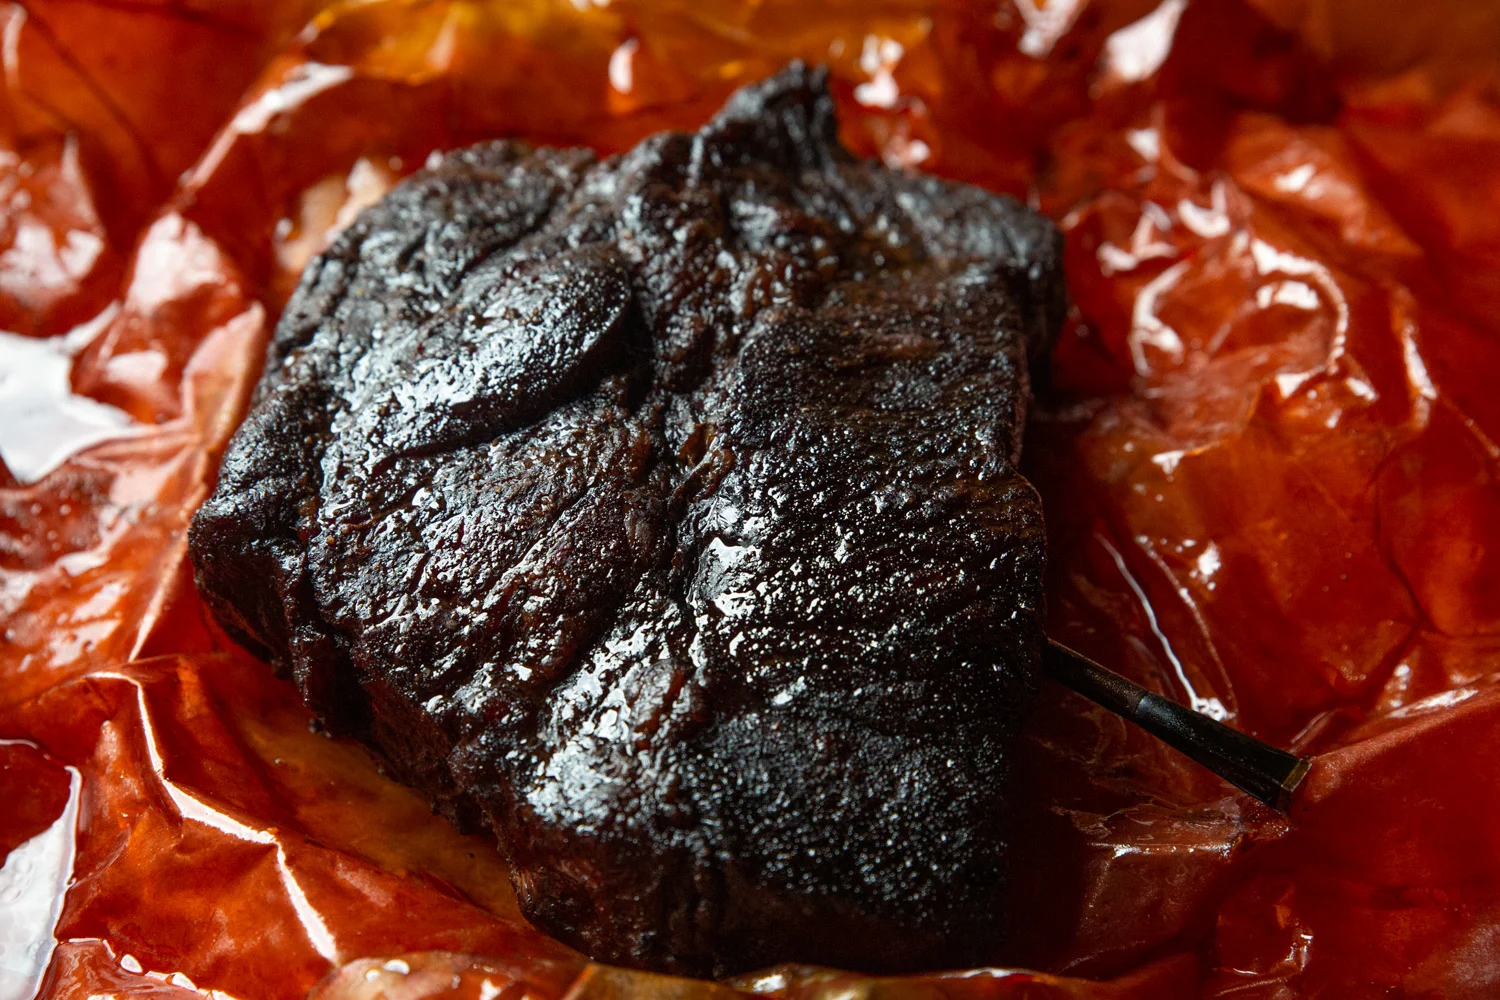 A fully smoked beef chuck roast in peach butcher paper